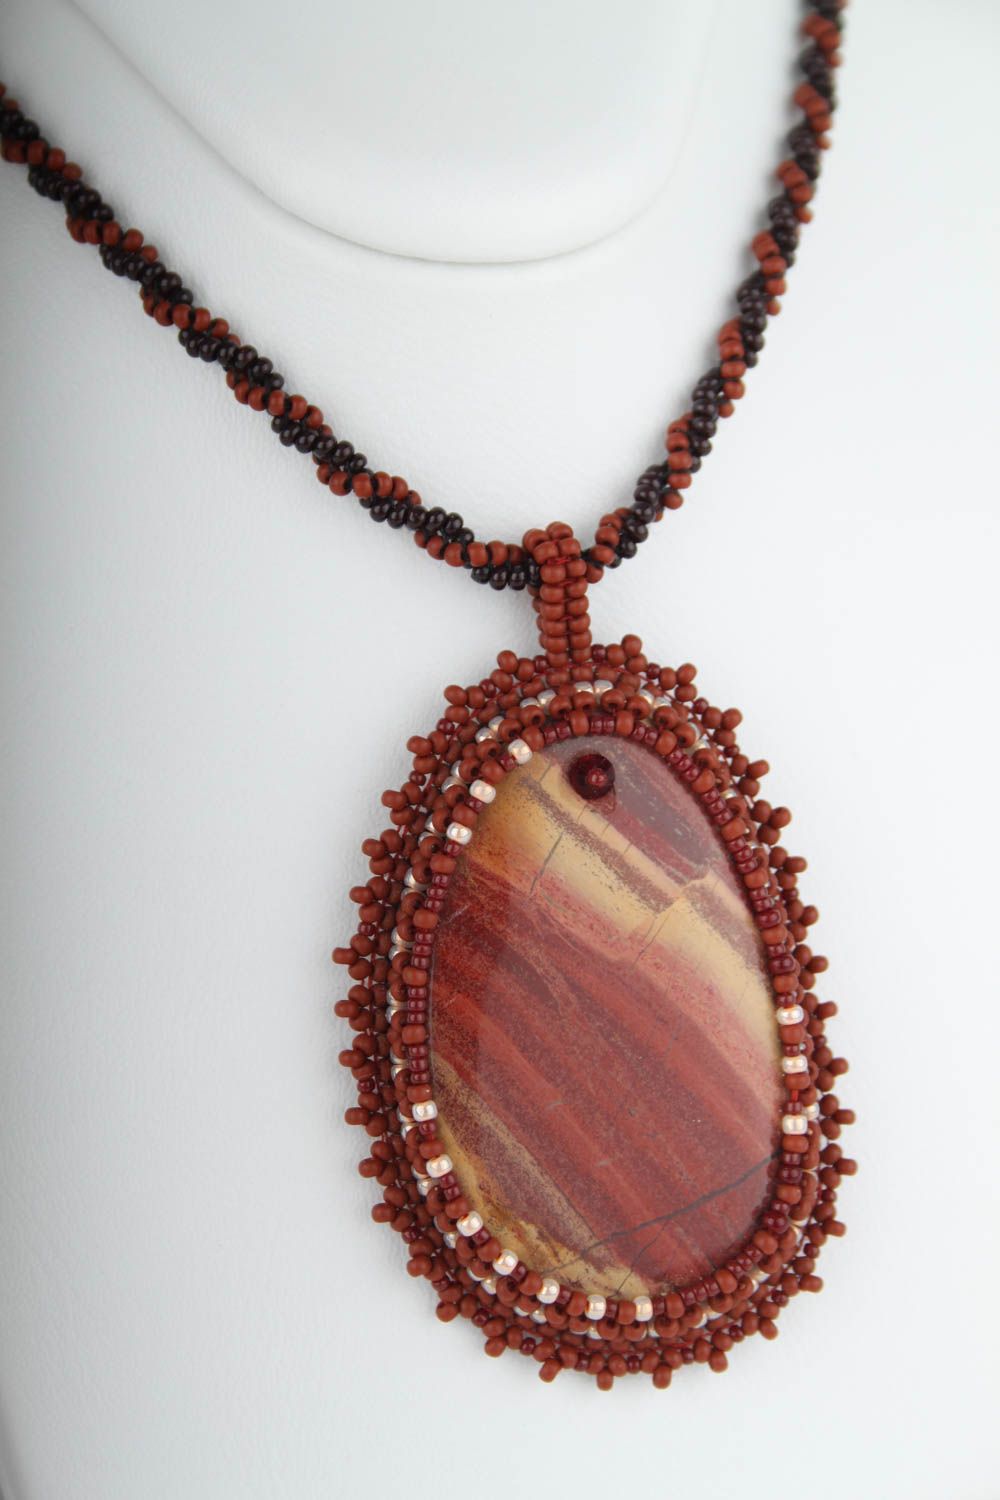 Handmade beaded pendant with natural stone stylish accessories trend bijouterie photo 3